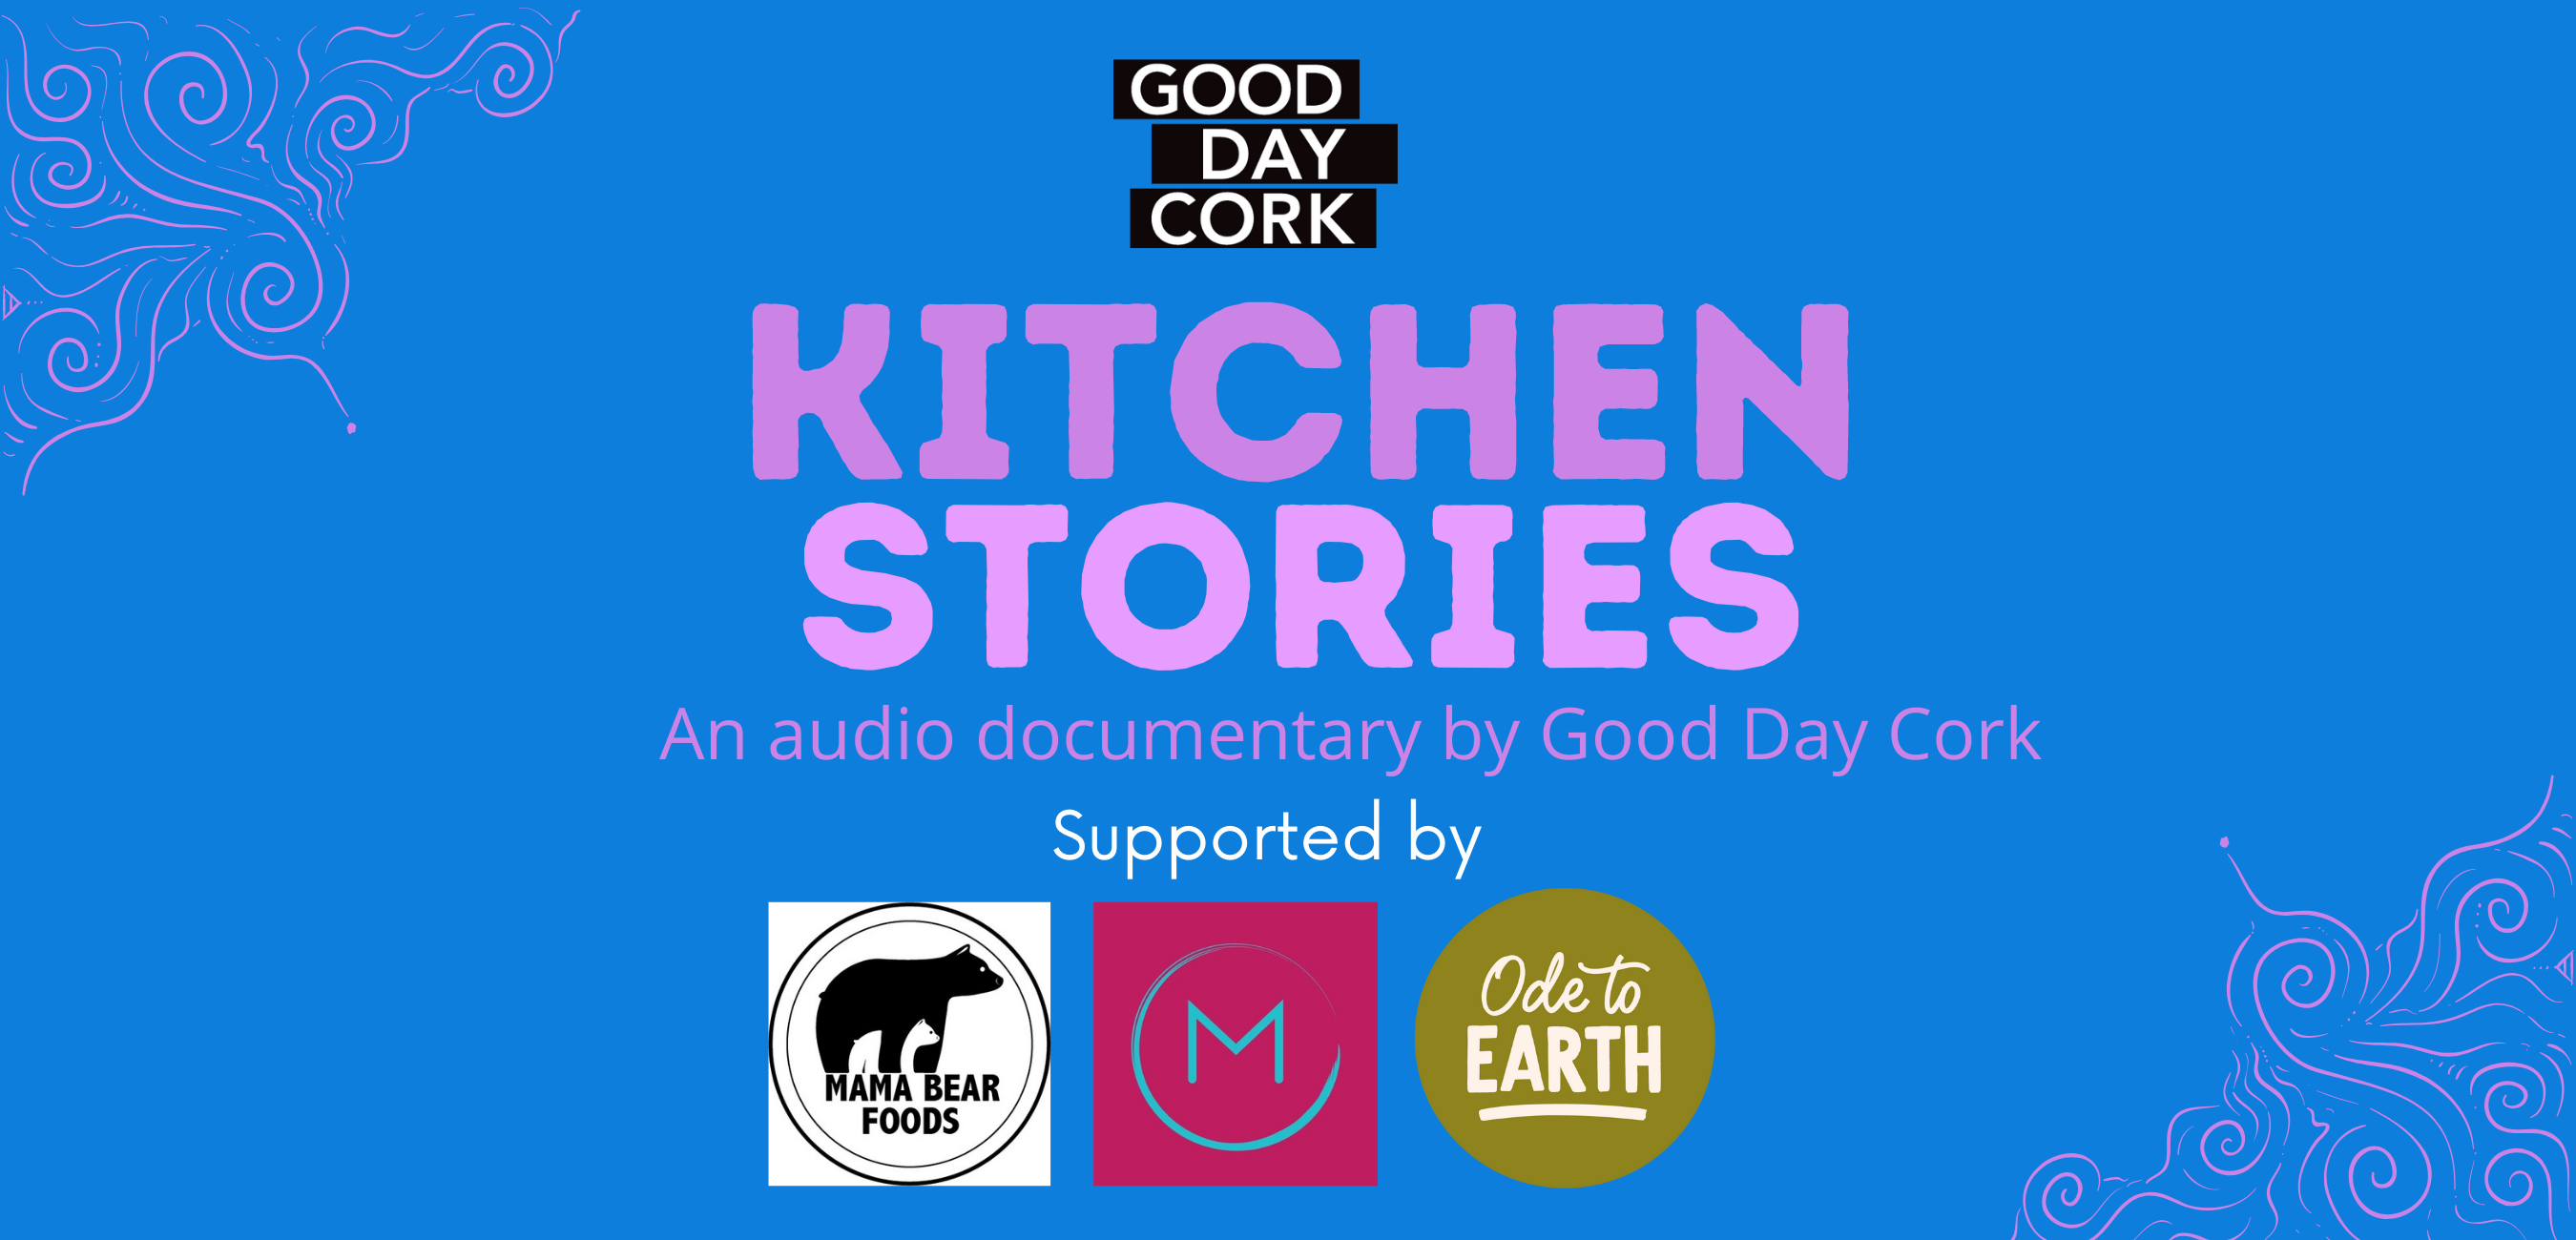 Photo with Logos of Good Day Cork MamaBear Foods Orla McAndrew Catering Ode To Earth - Text reads Kitchen Stories - An audio documentary by Good Day Cork.